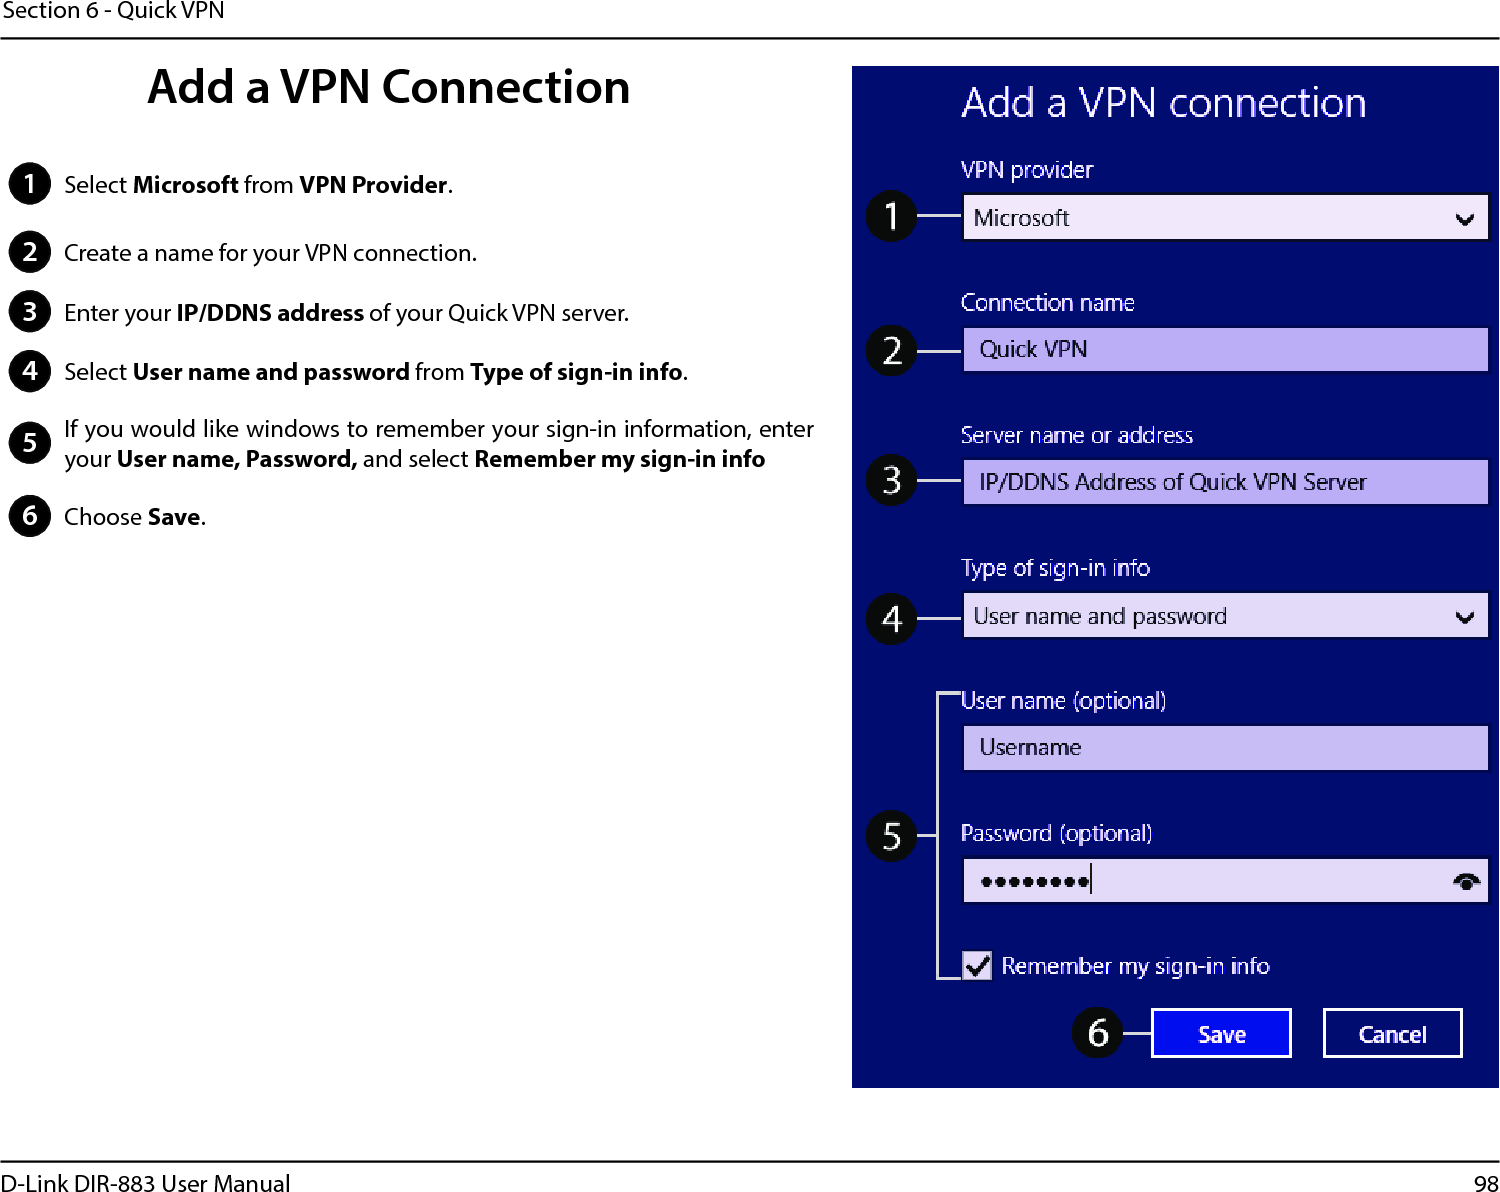 98D-Link DIR-883 User ManualSection 6 - Quick VPN1Select Microsoft from VPN Provider.2Create a name for your VPN connection.3Enter your IP/DDNS address of your Quick VPN server.4Select User name and password from Type of sign-in info.5If you would like windows to remember your sign-in information, enter your User name, Password, and select Remember my sign-in info6Choose Save.Add a VPN Connection